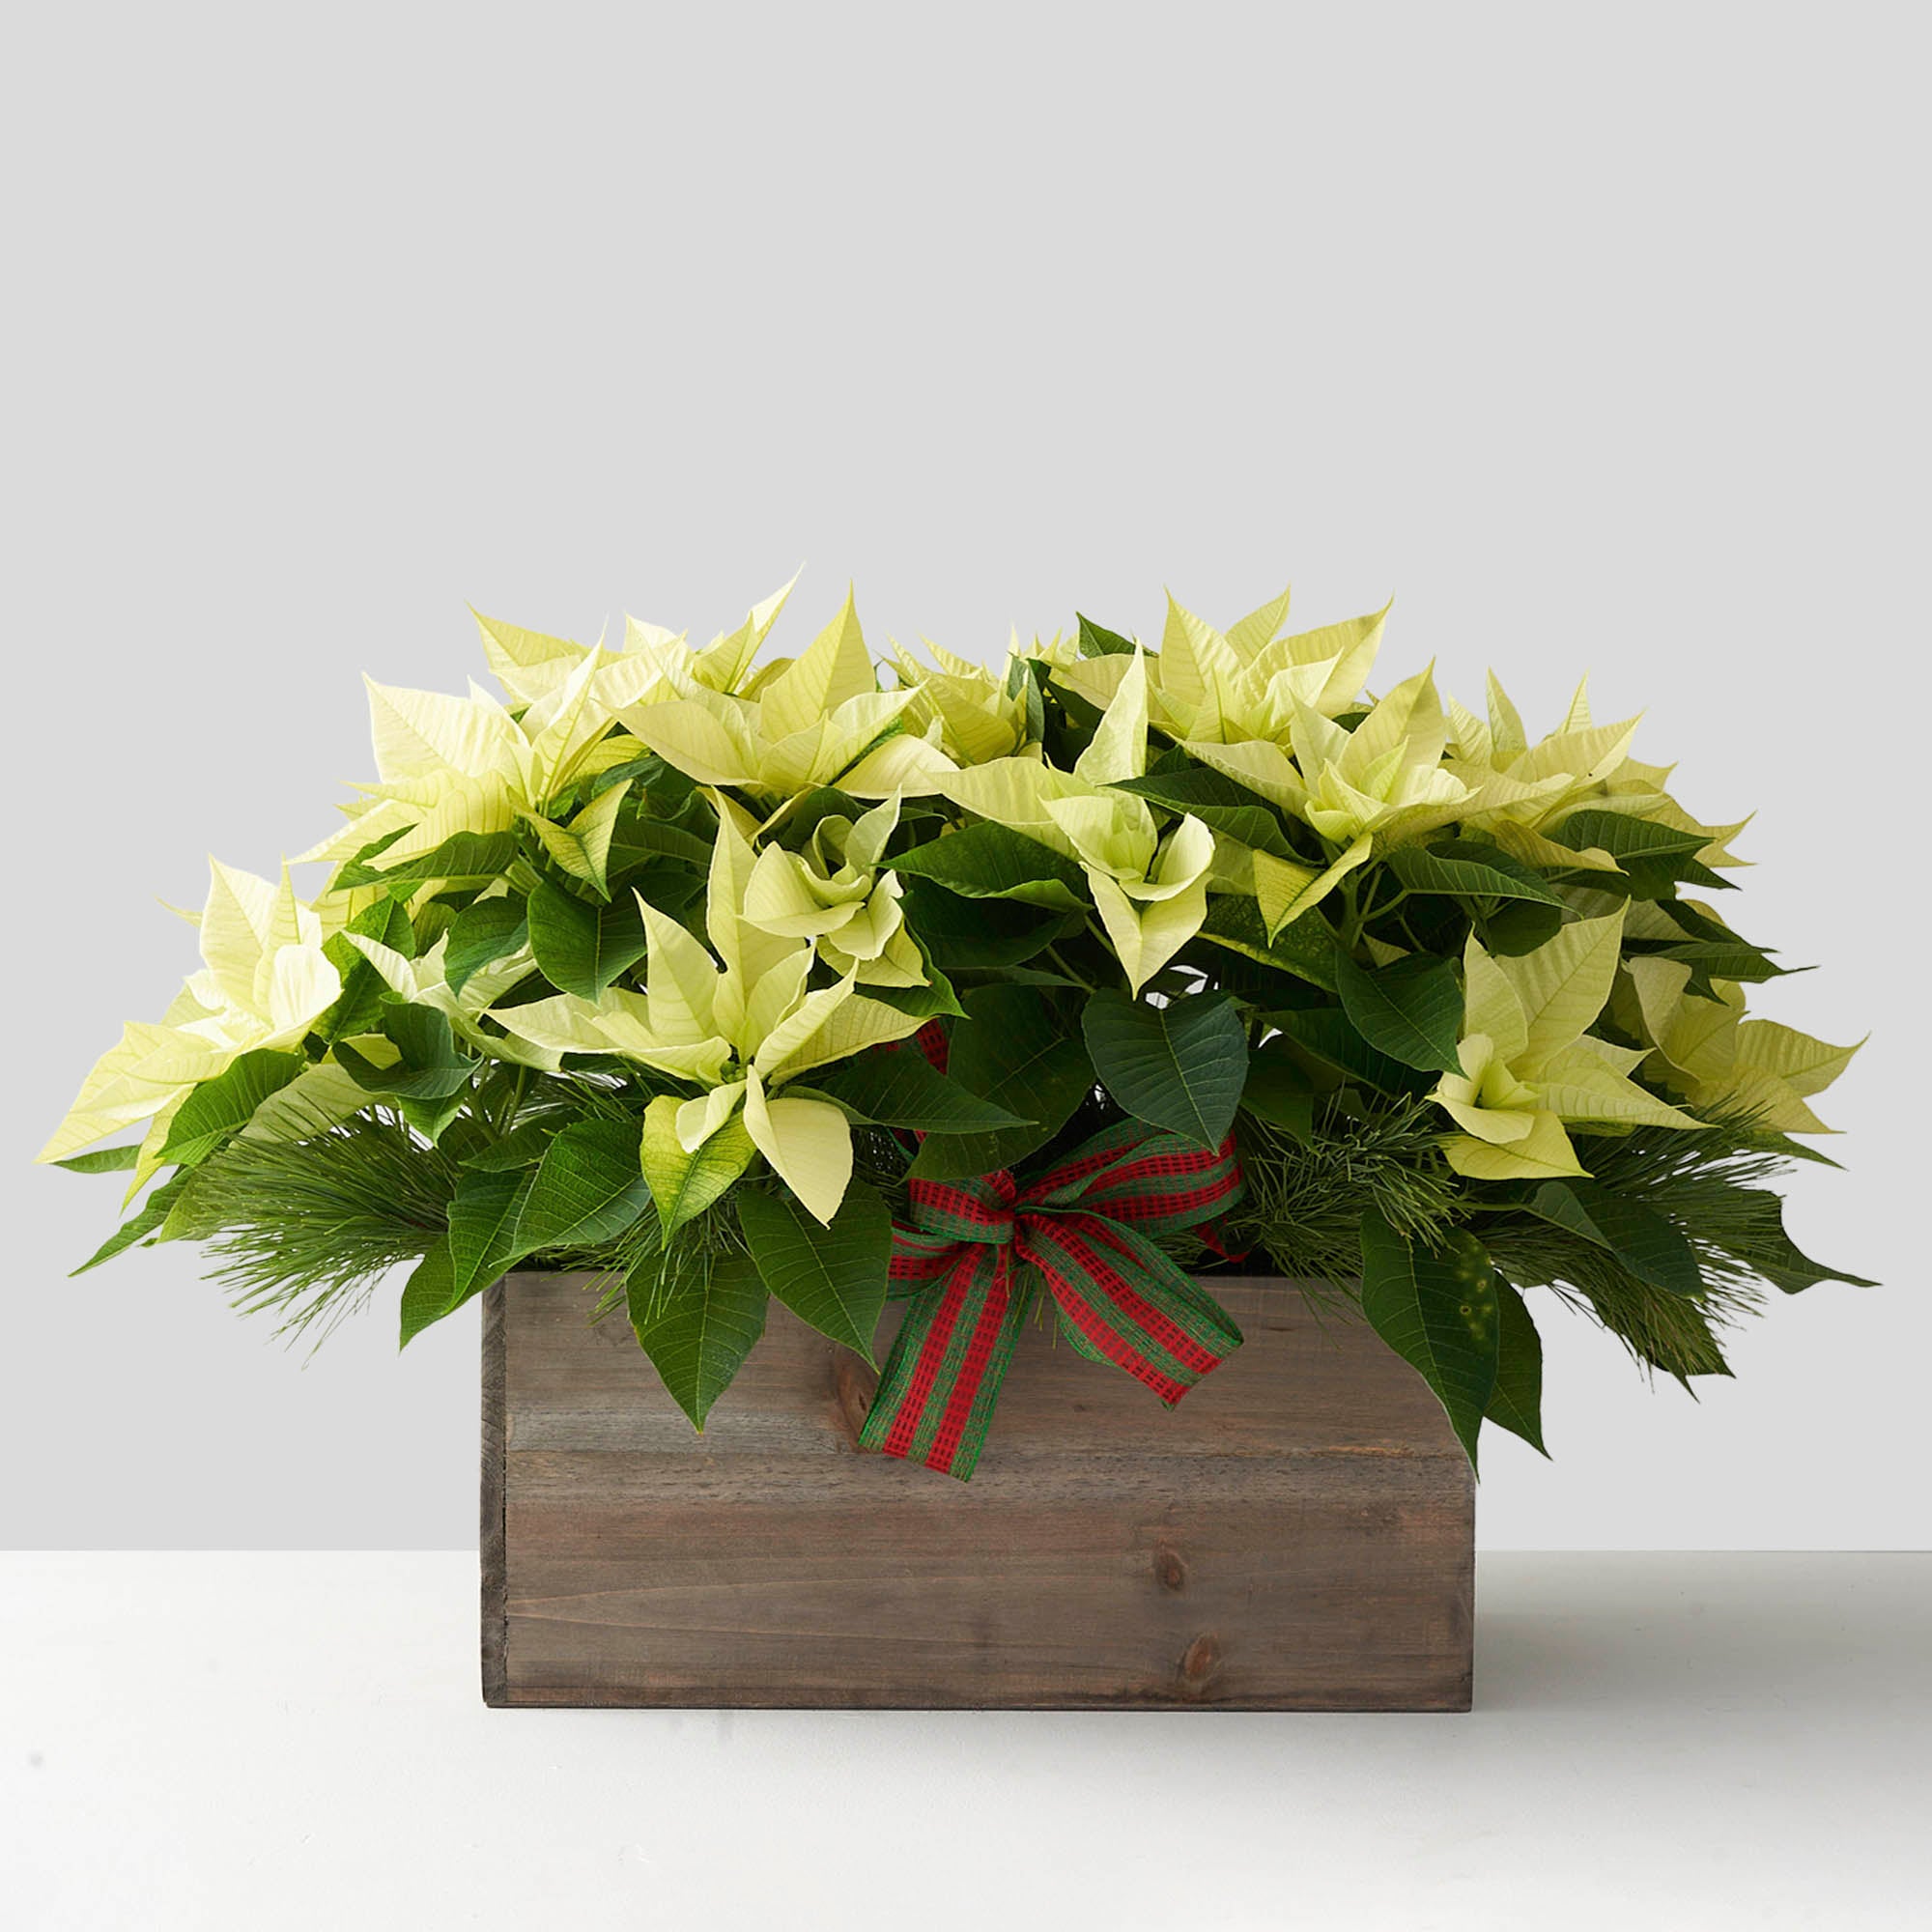 White poinsettia in wooden box with pine boughs and red and green ribbon.